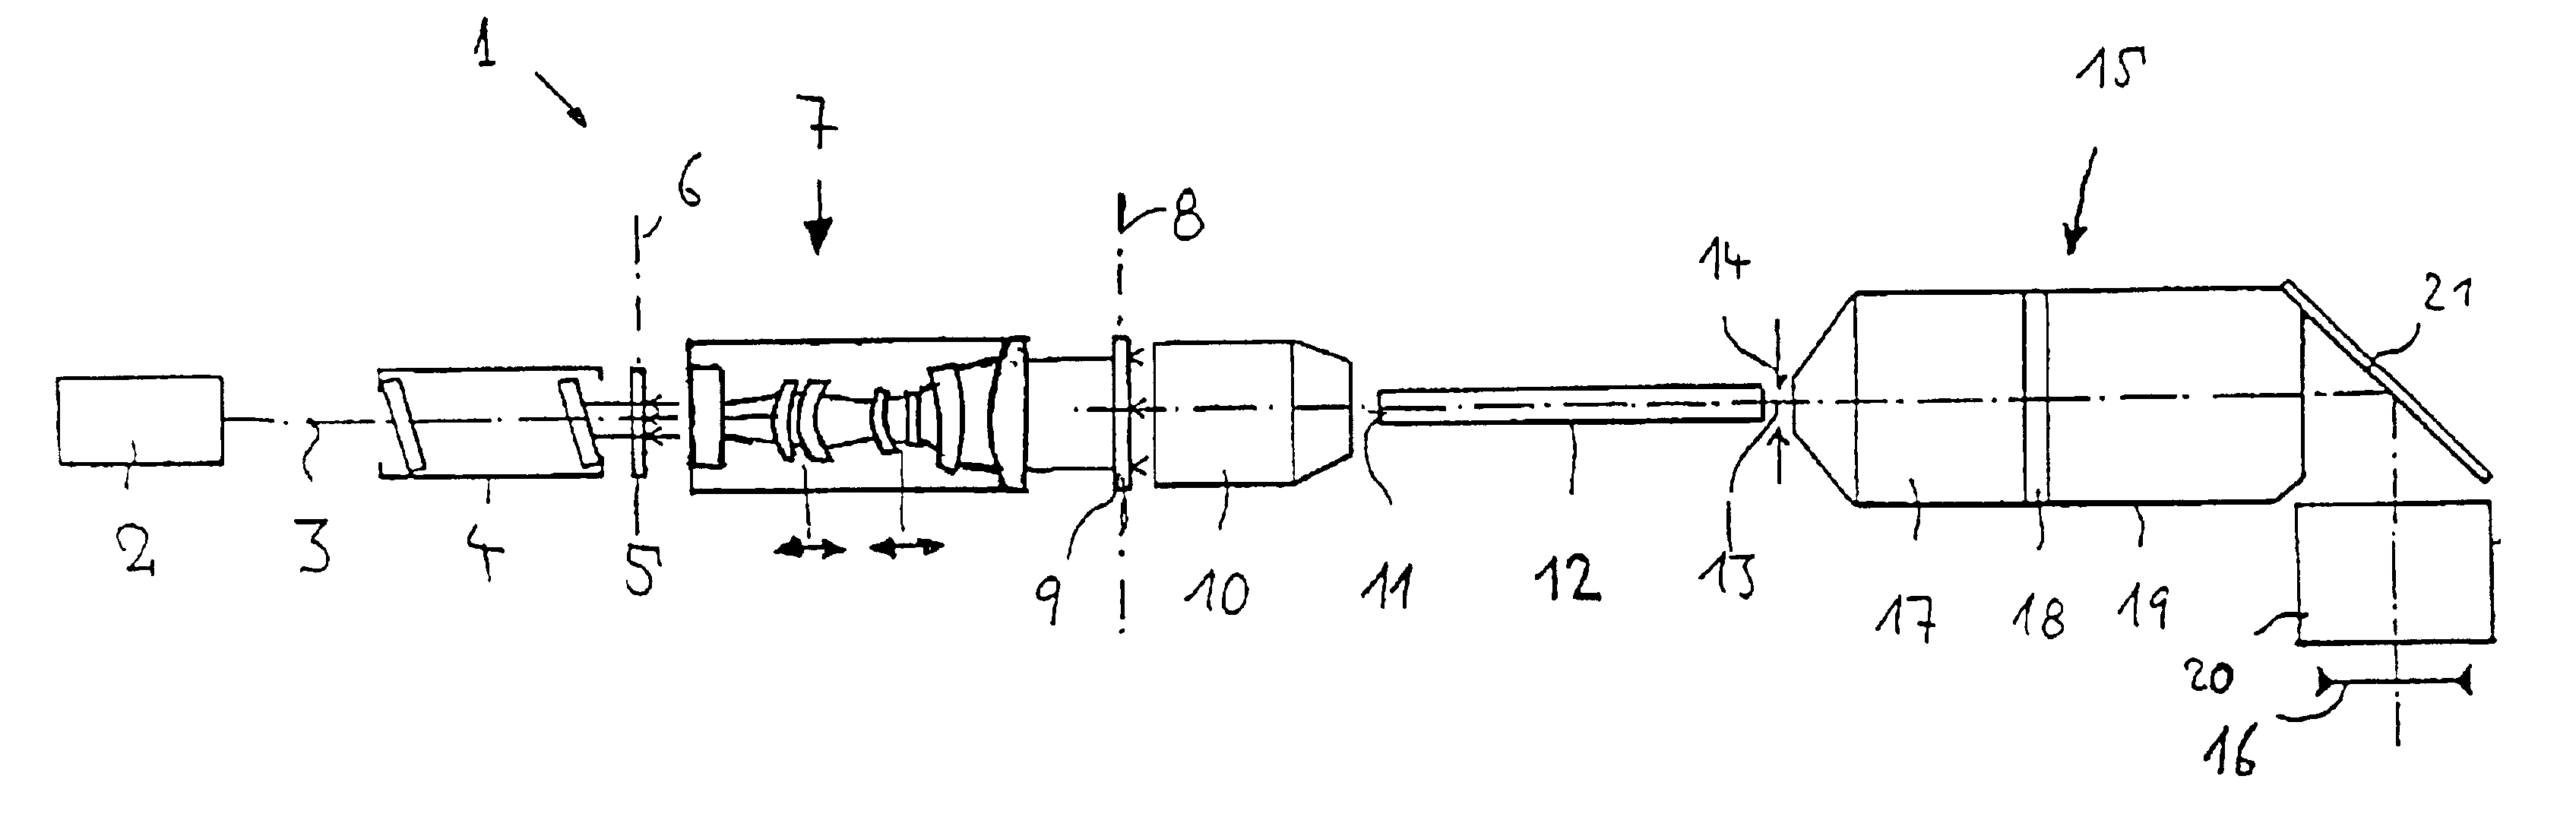 Zoom system for an illumination device